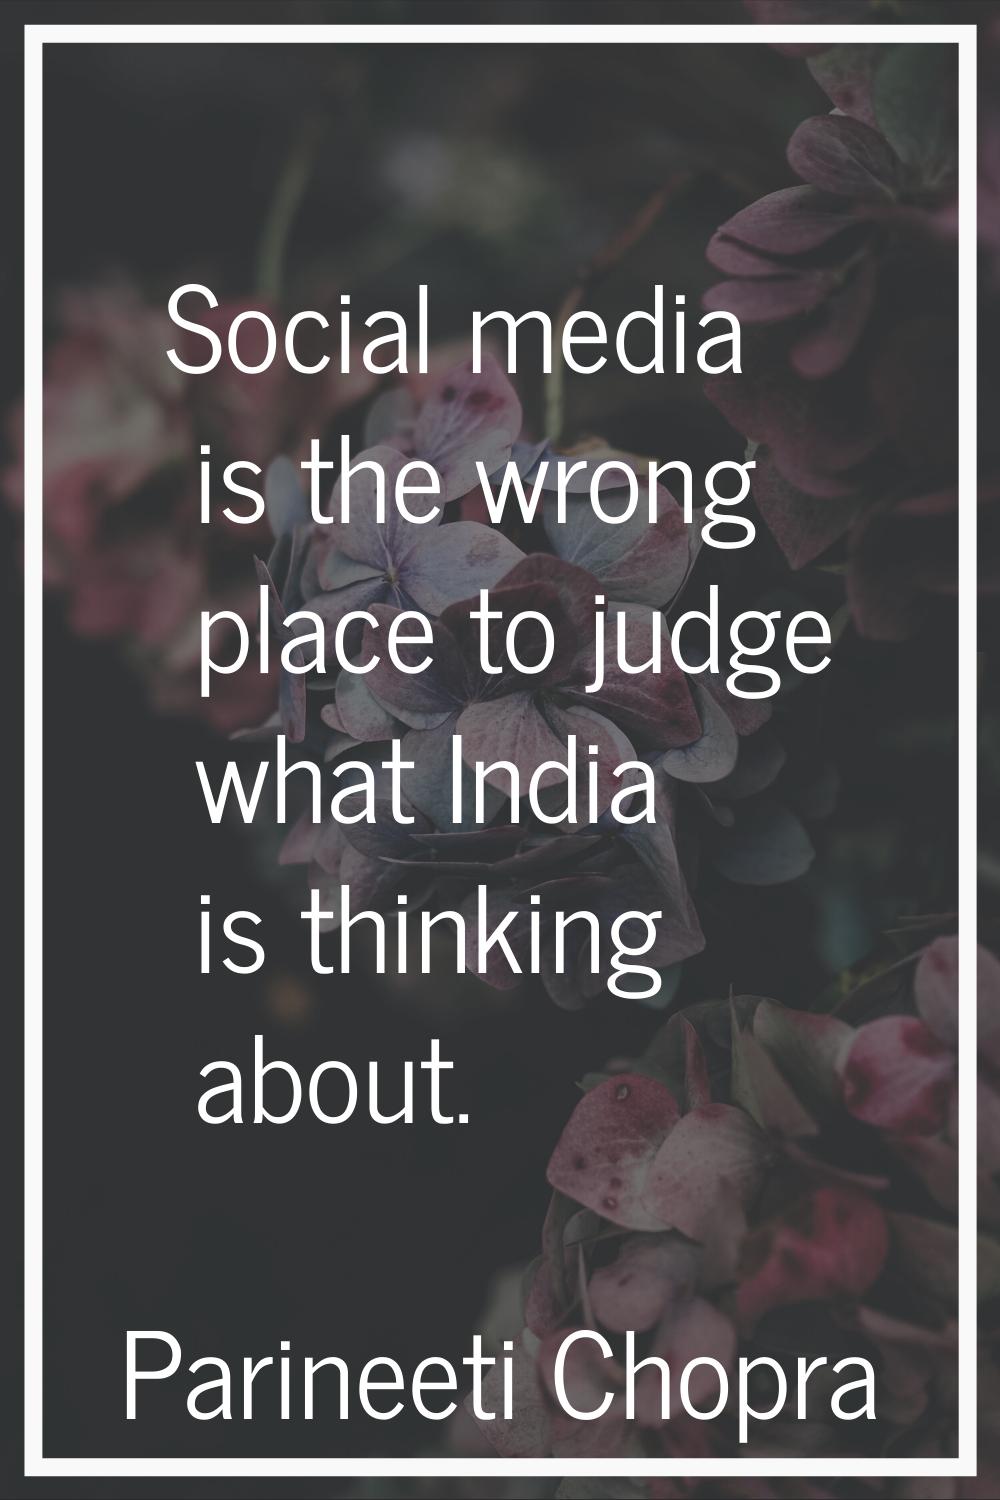 Social media is the wrong place to judge what India is thinking about.